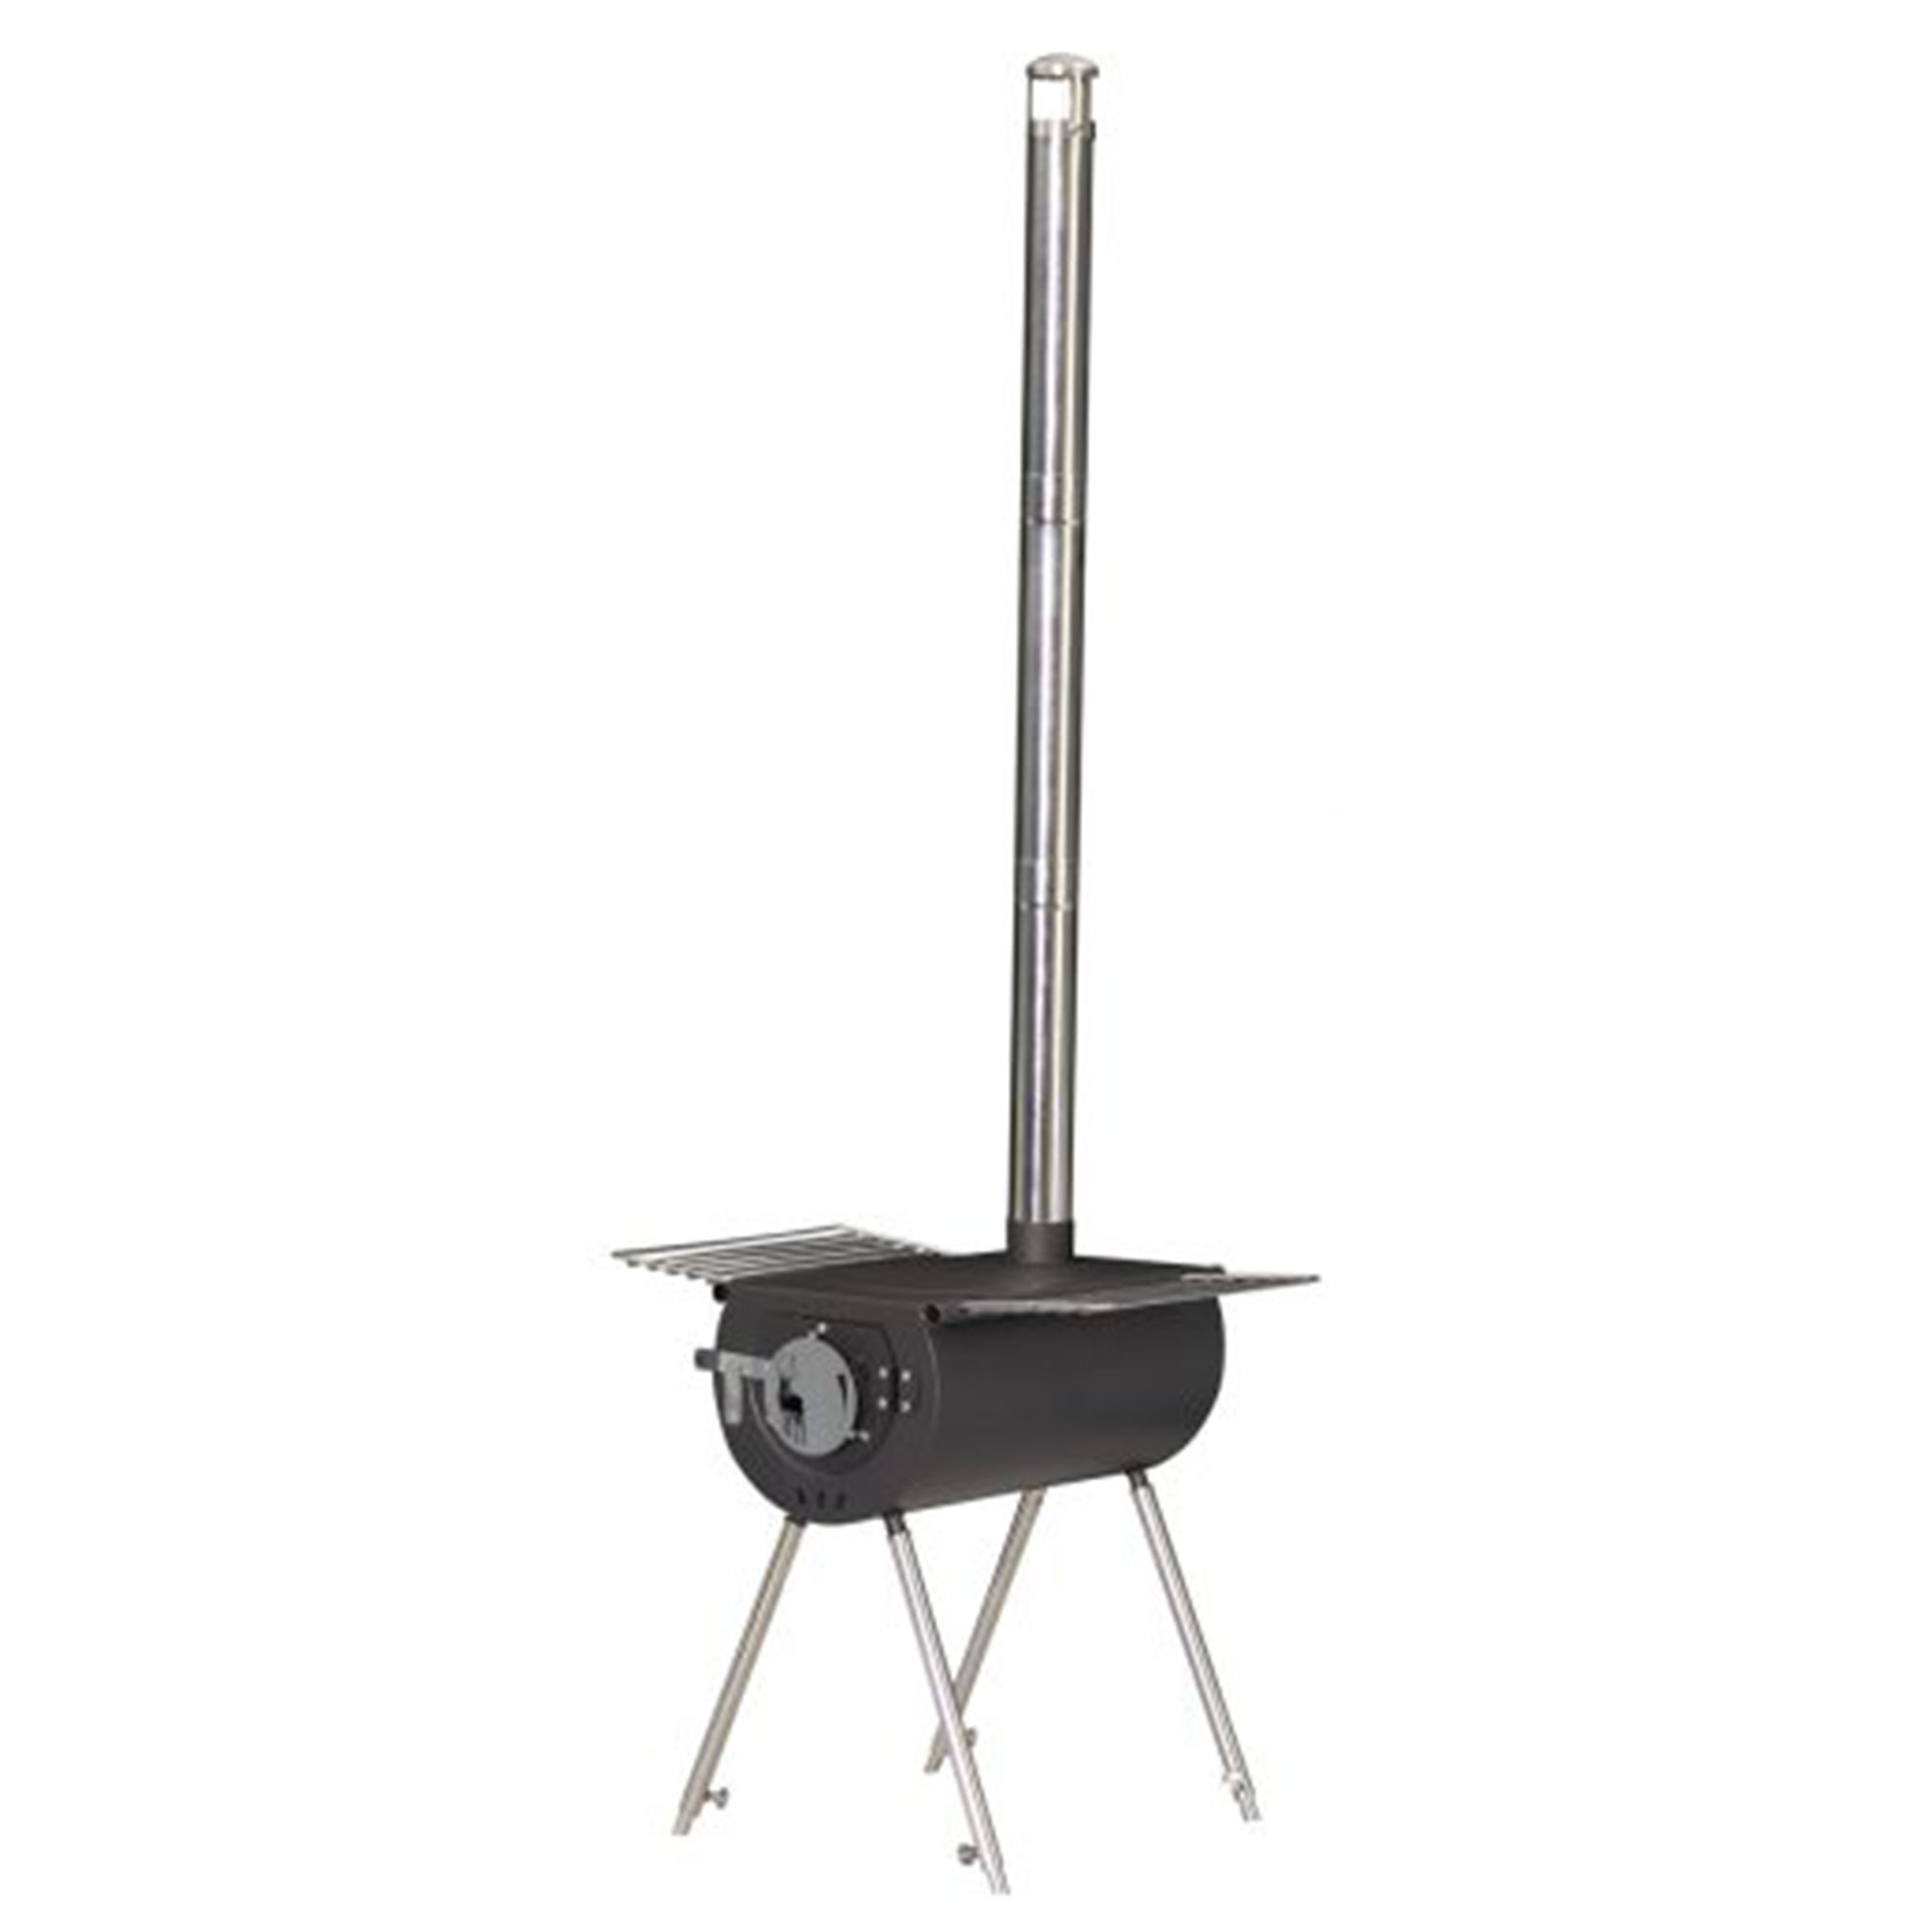 US Stove Company Caribou Backpacker 14 Inch Camp Stove with Extendable Legs - image 1 of 11